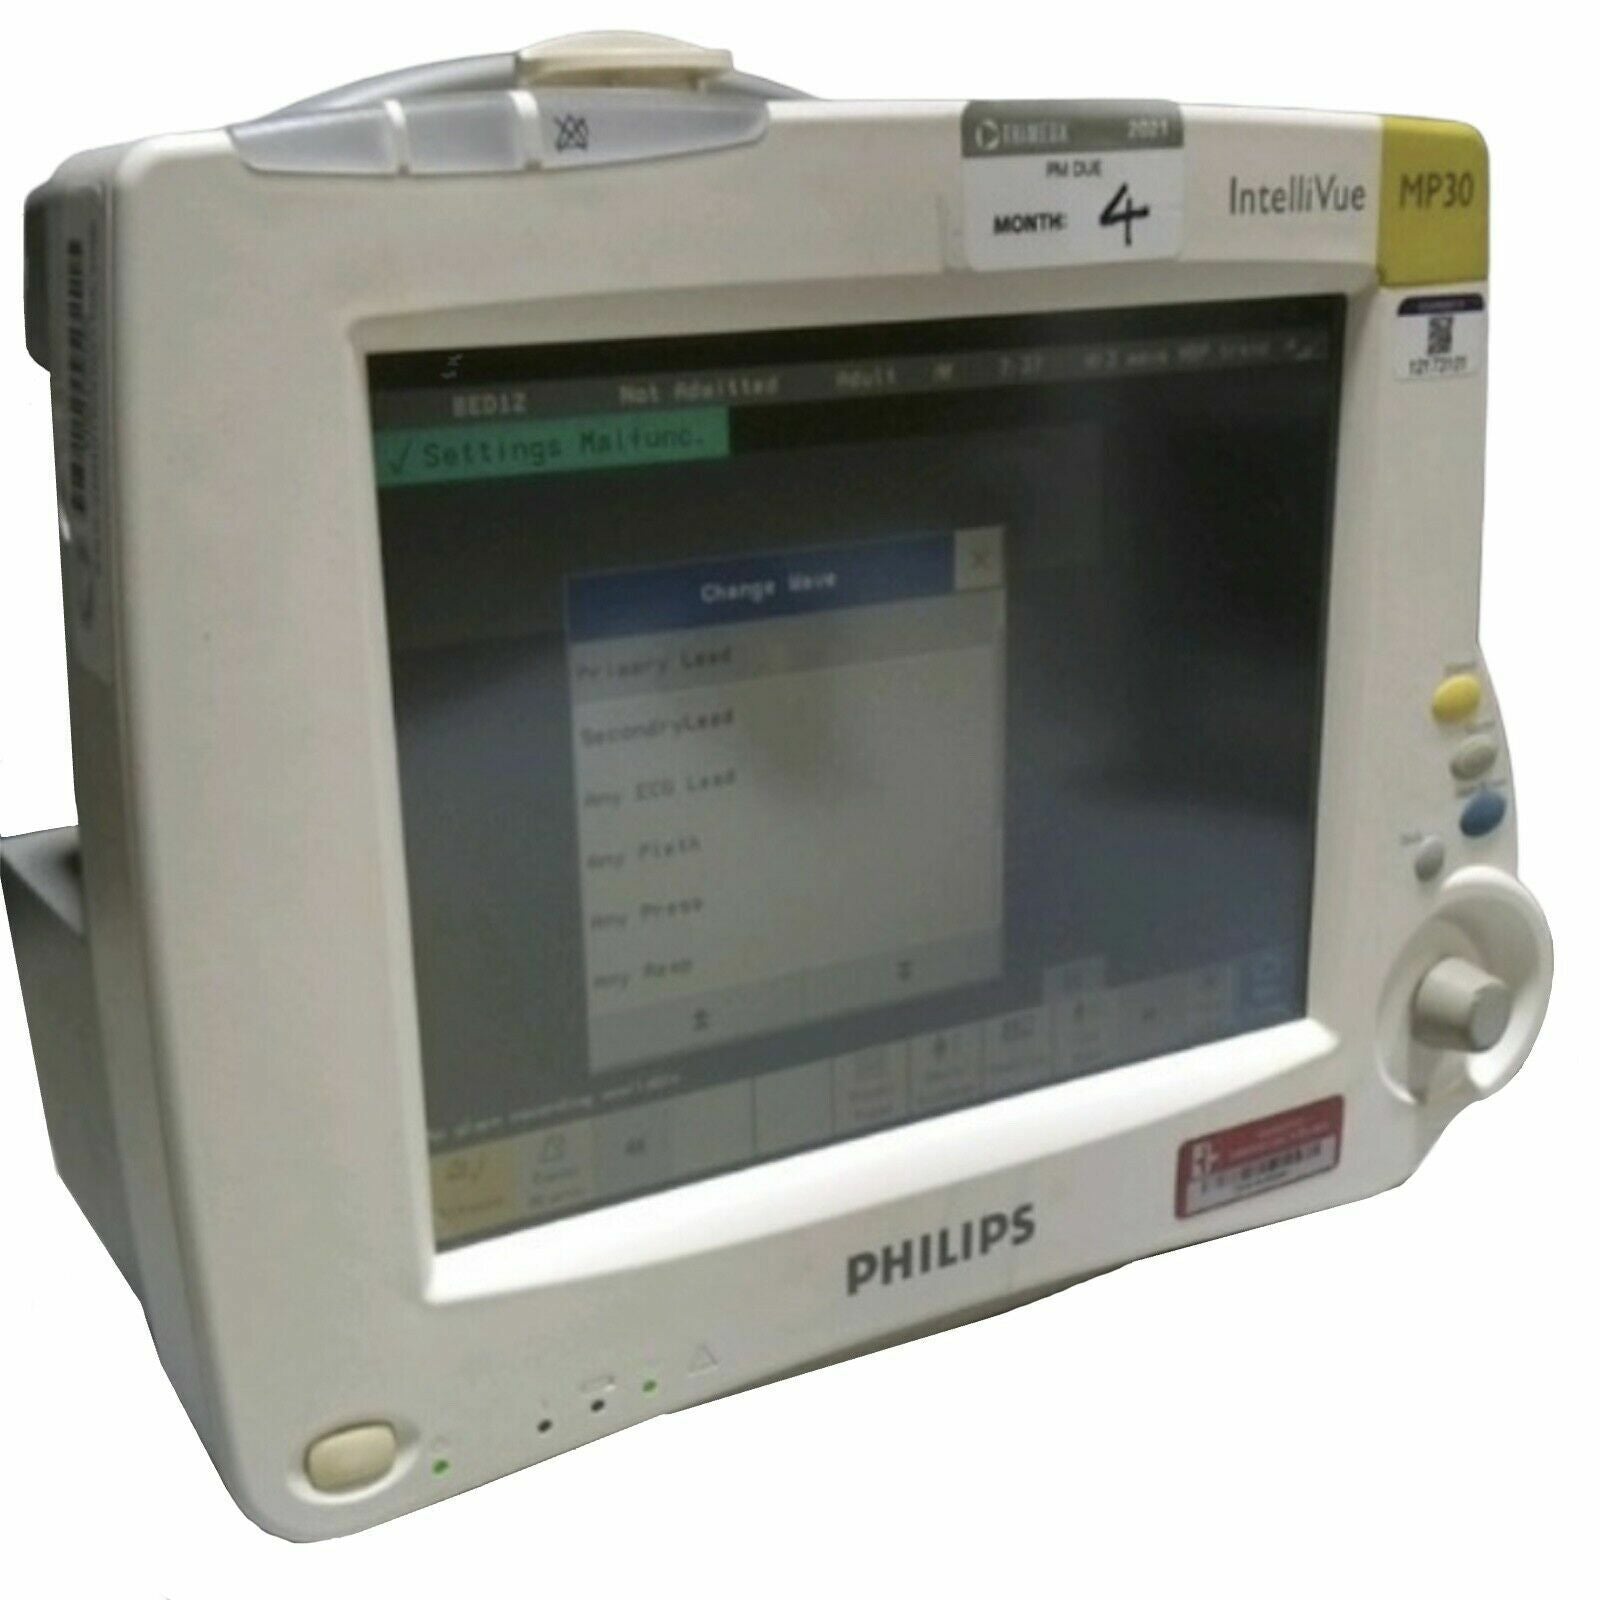 Philips MP30 IntelliVue Patient Monitor DIAGNOSTIC ULTRASOUND MACHINES FOR SALE